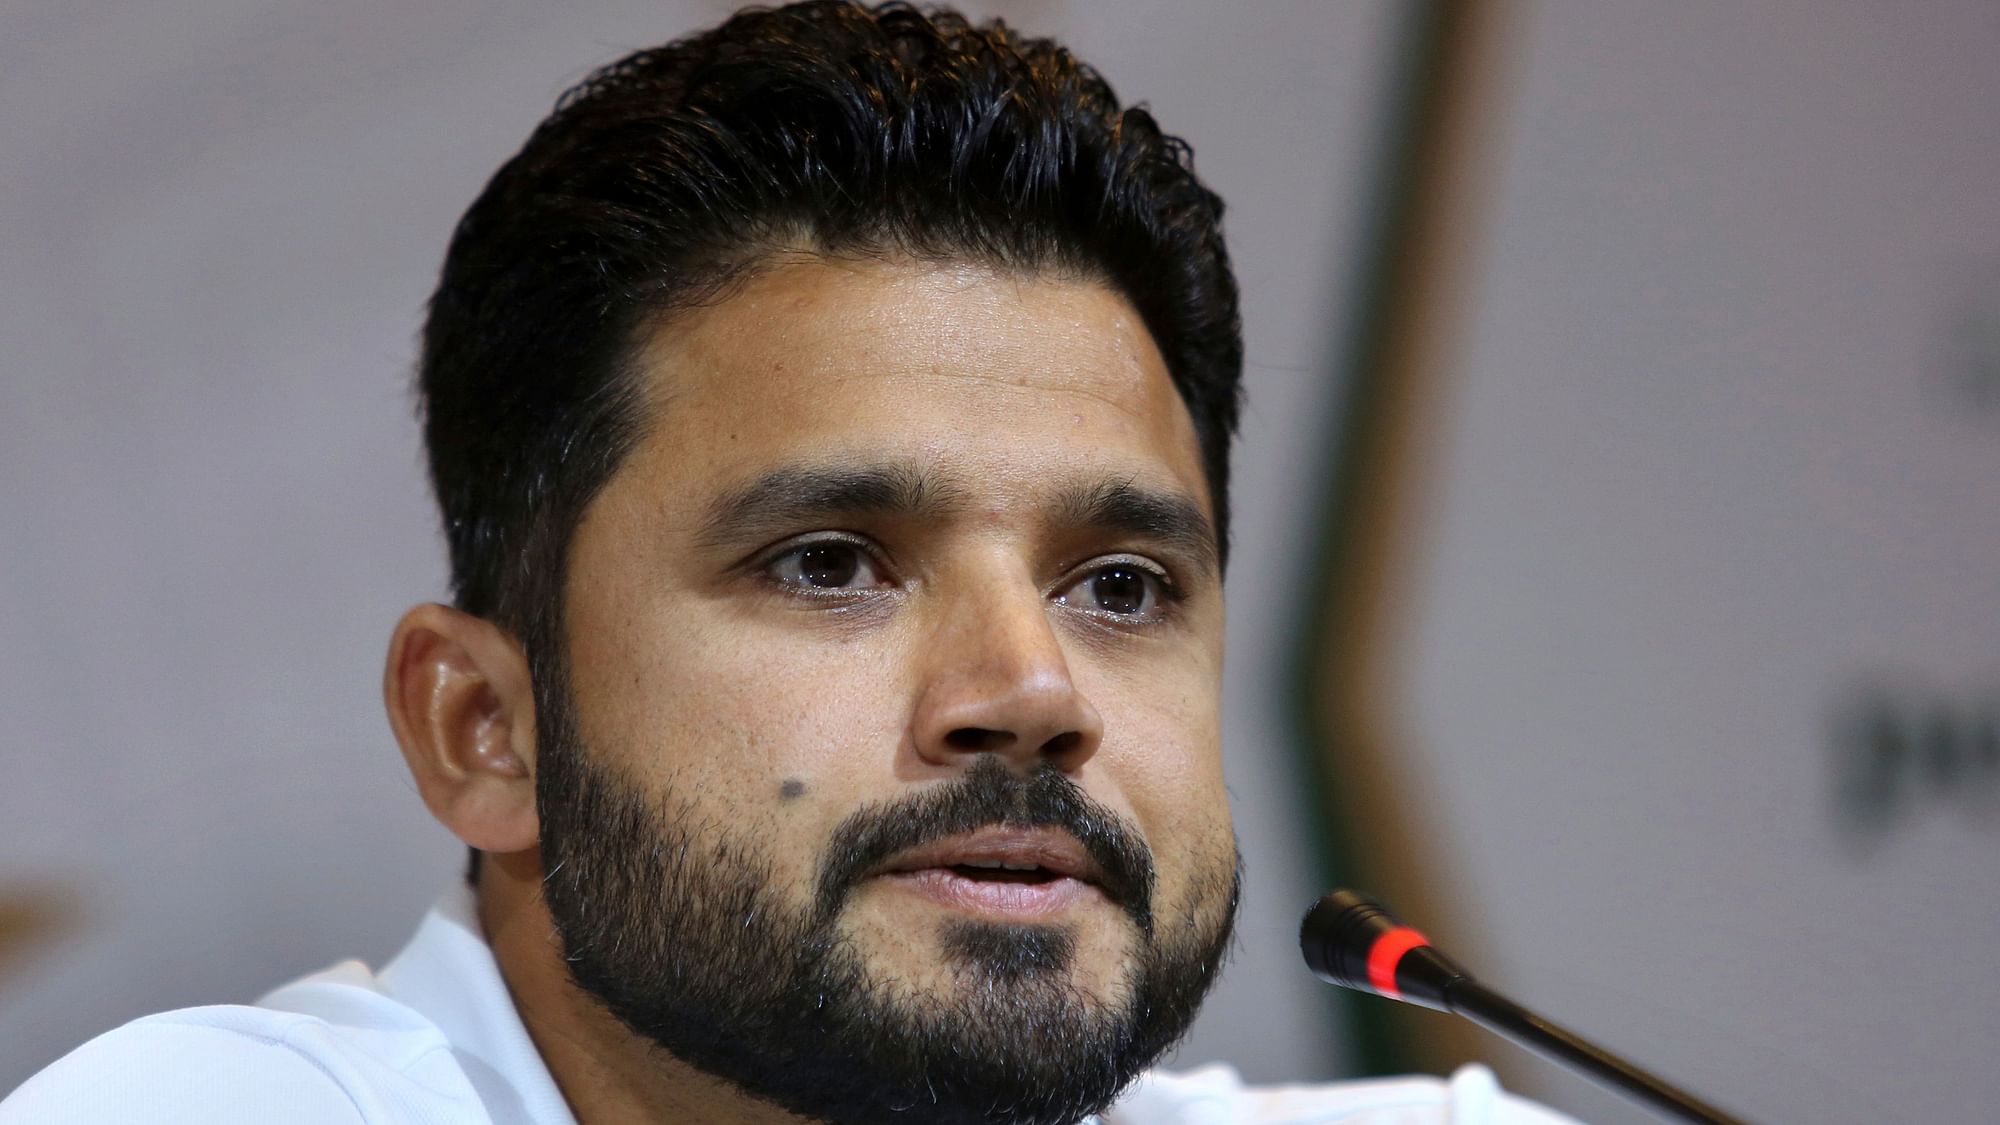 Pakistan test captain Azhar Ali speaks during a press conference in Lahore, Pakistan. Ali wants to quickly put behind two heavy defeats against Australia and prepare for next week’s historic home test series against Sri Lanka with fresh mind.